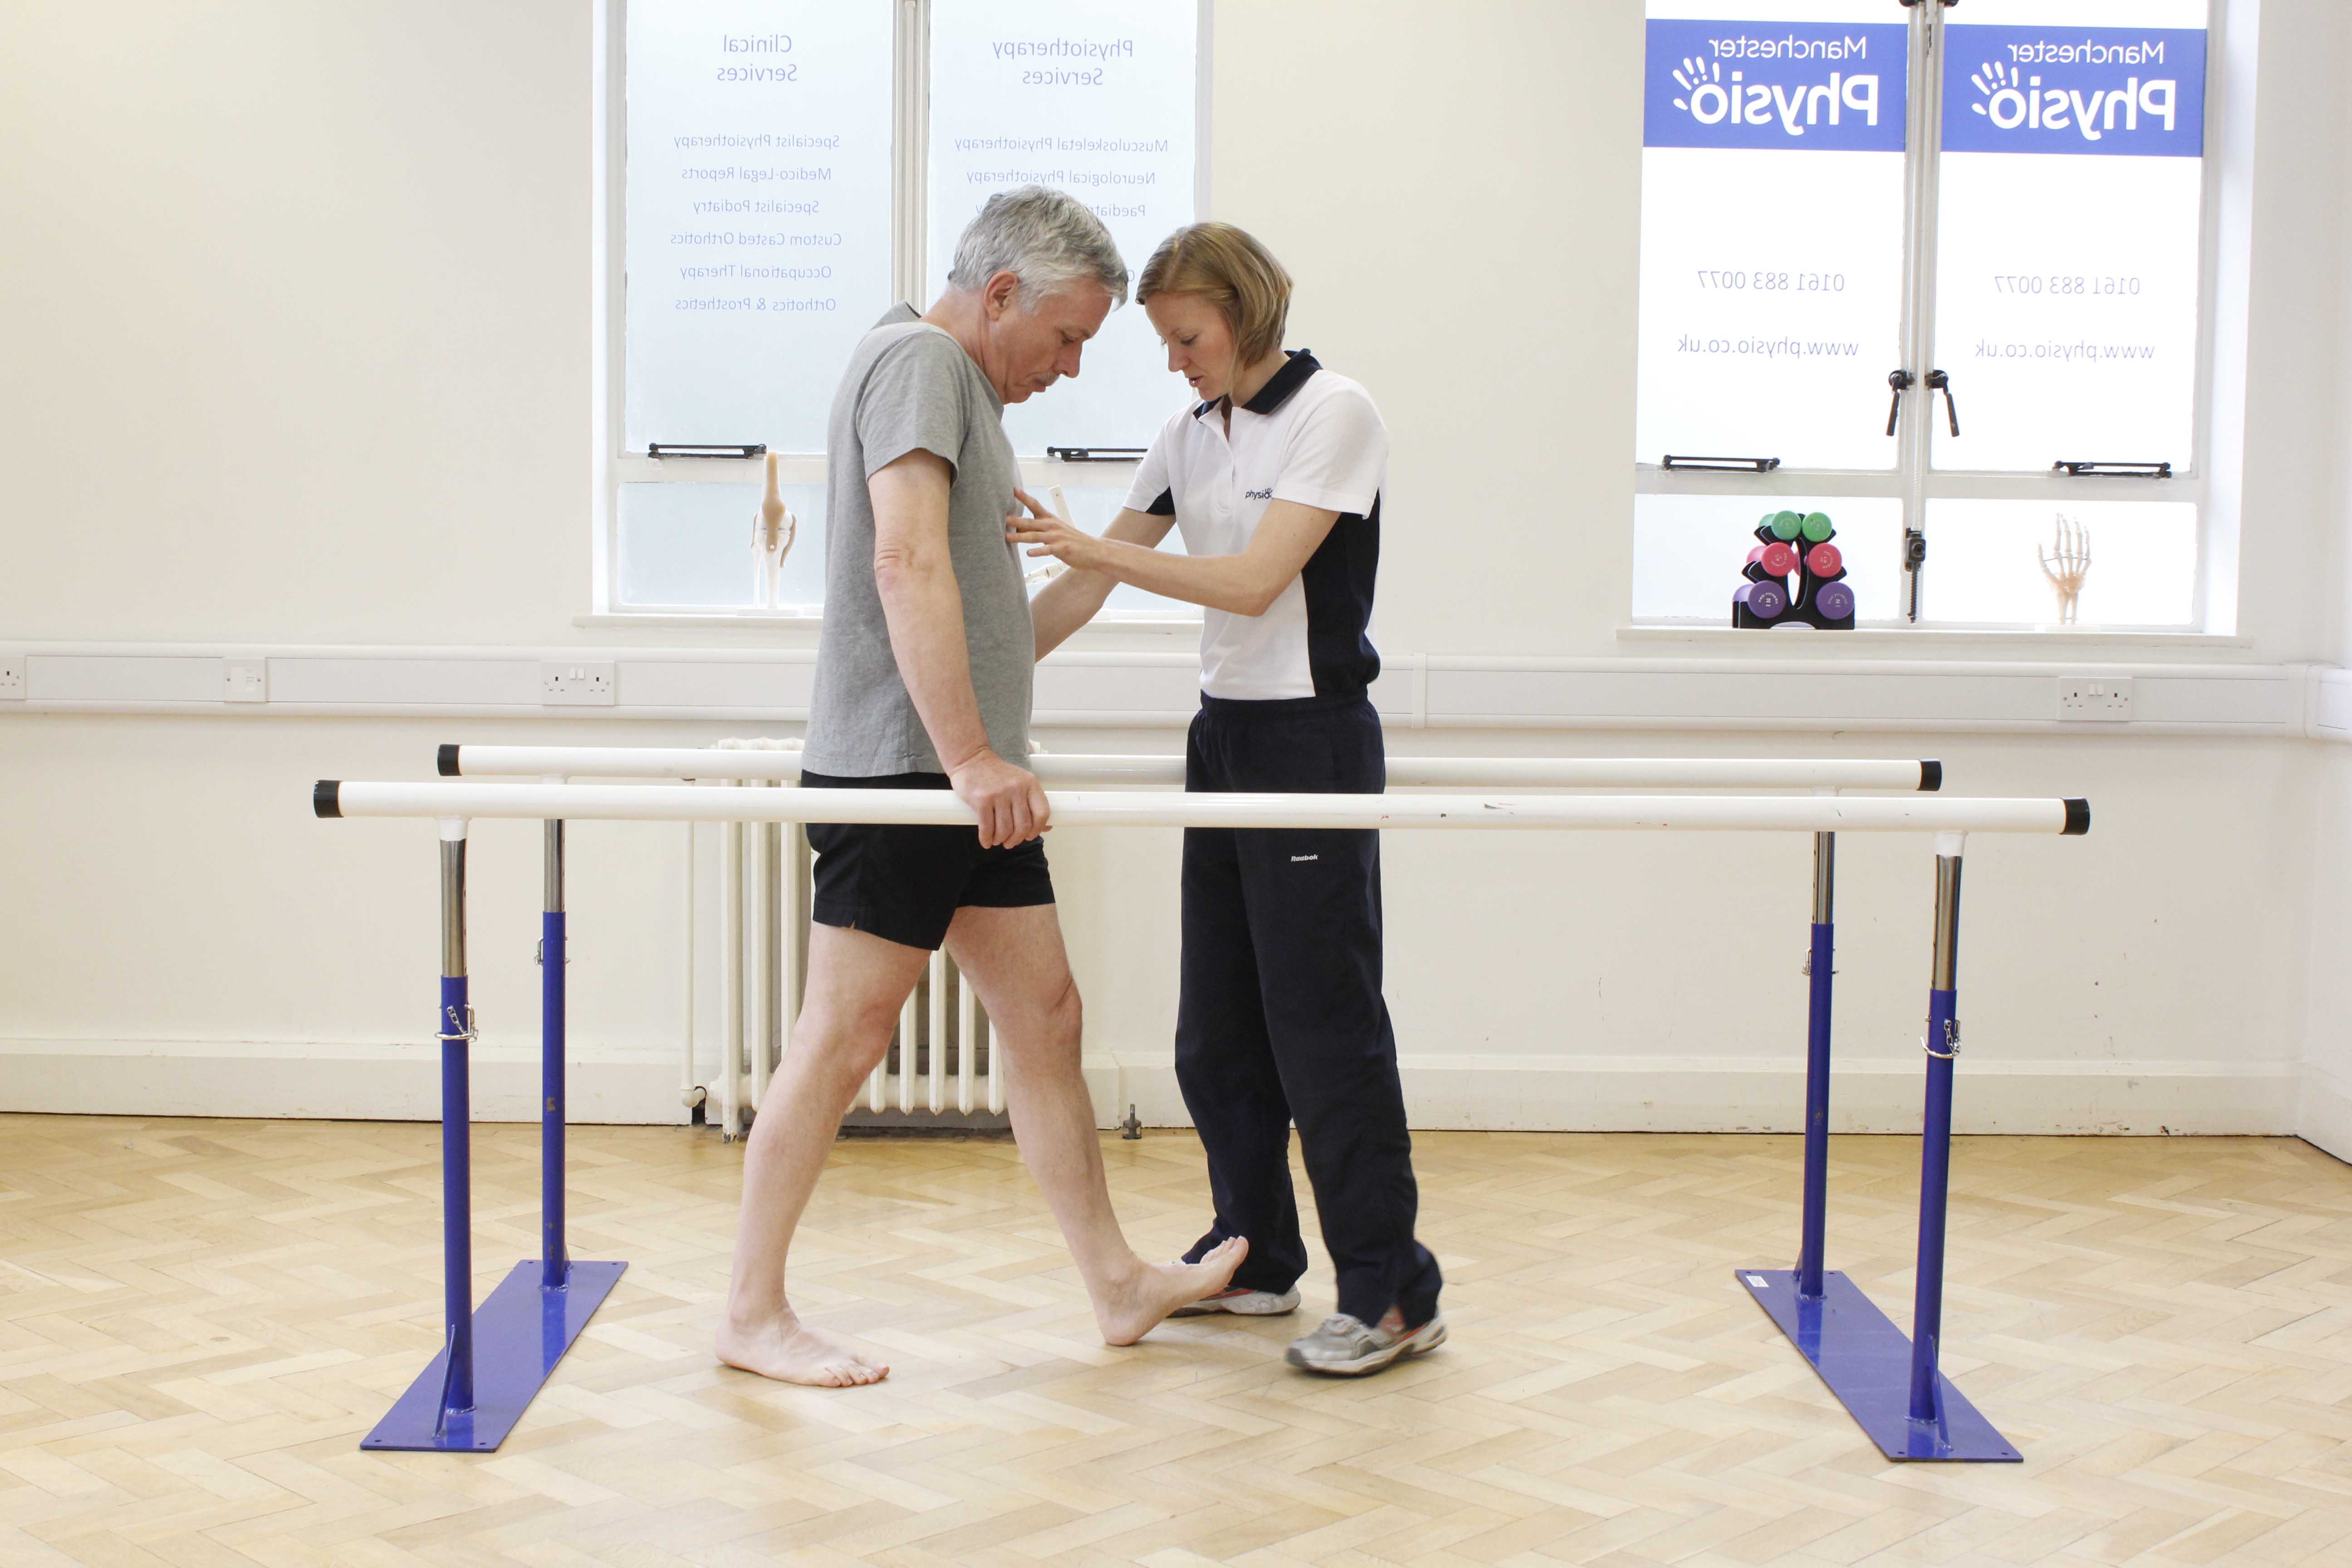 Gait re-education mobility exercises between the parallel bars under supervision of a physiotherapist